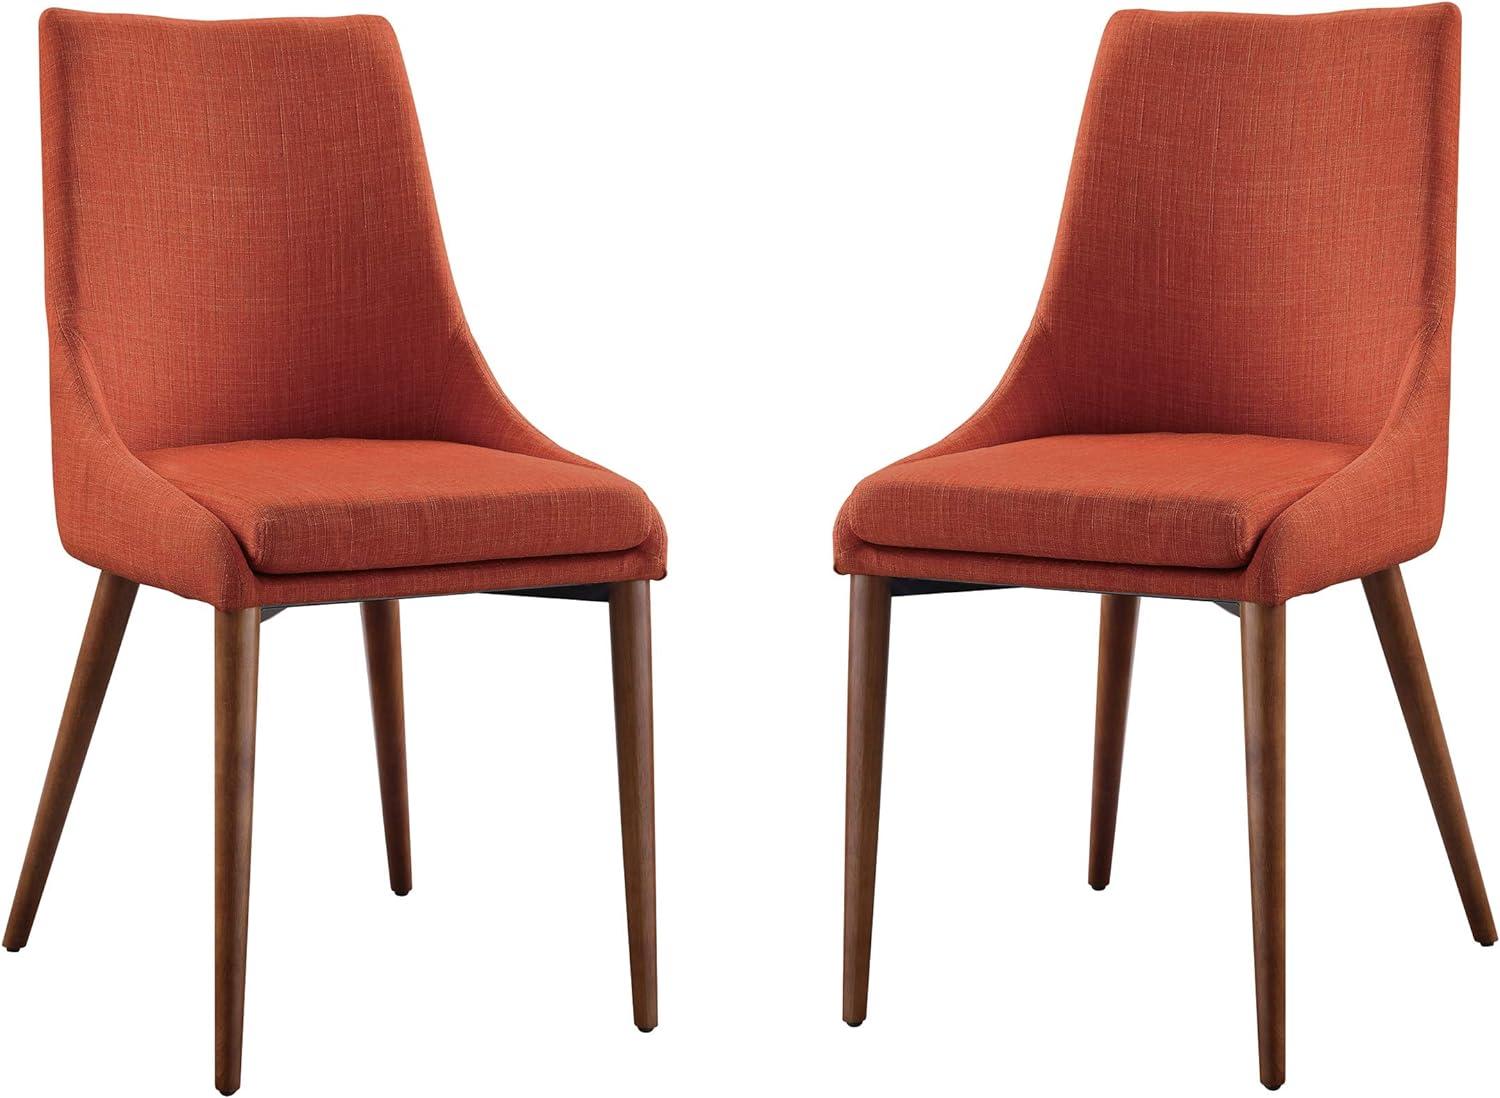 Contemporary Tangerine Upholstered Wood Side Chair